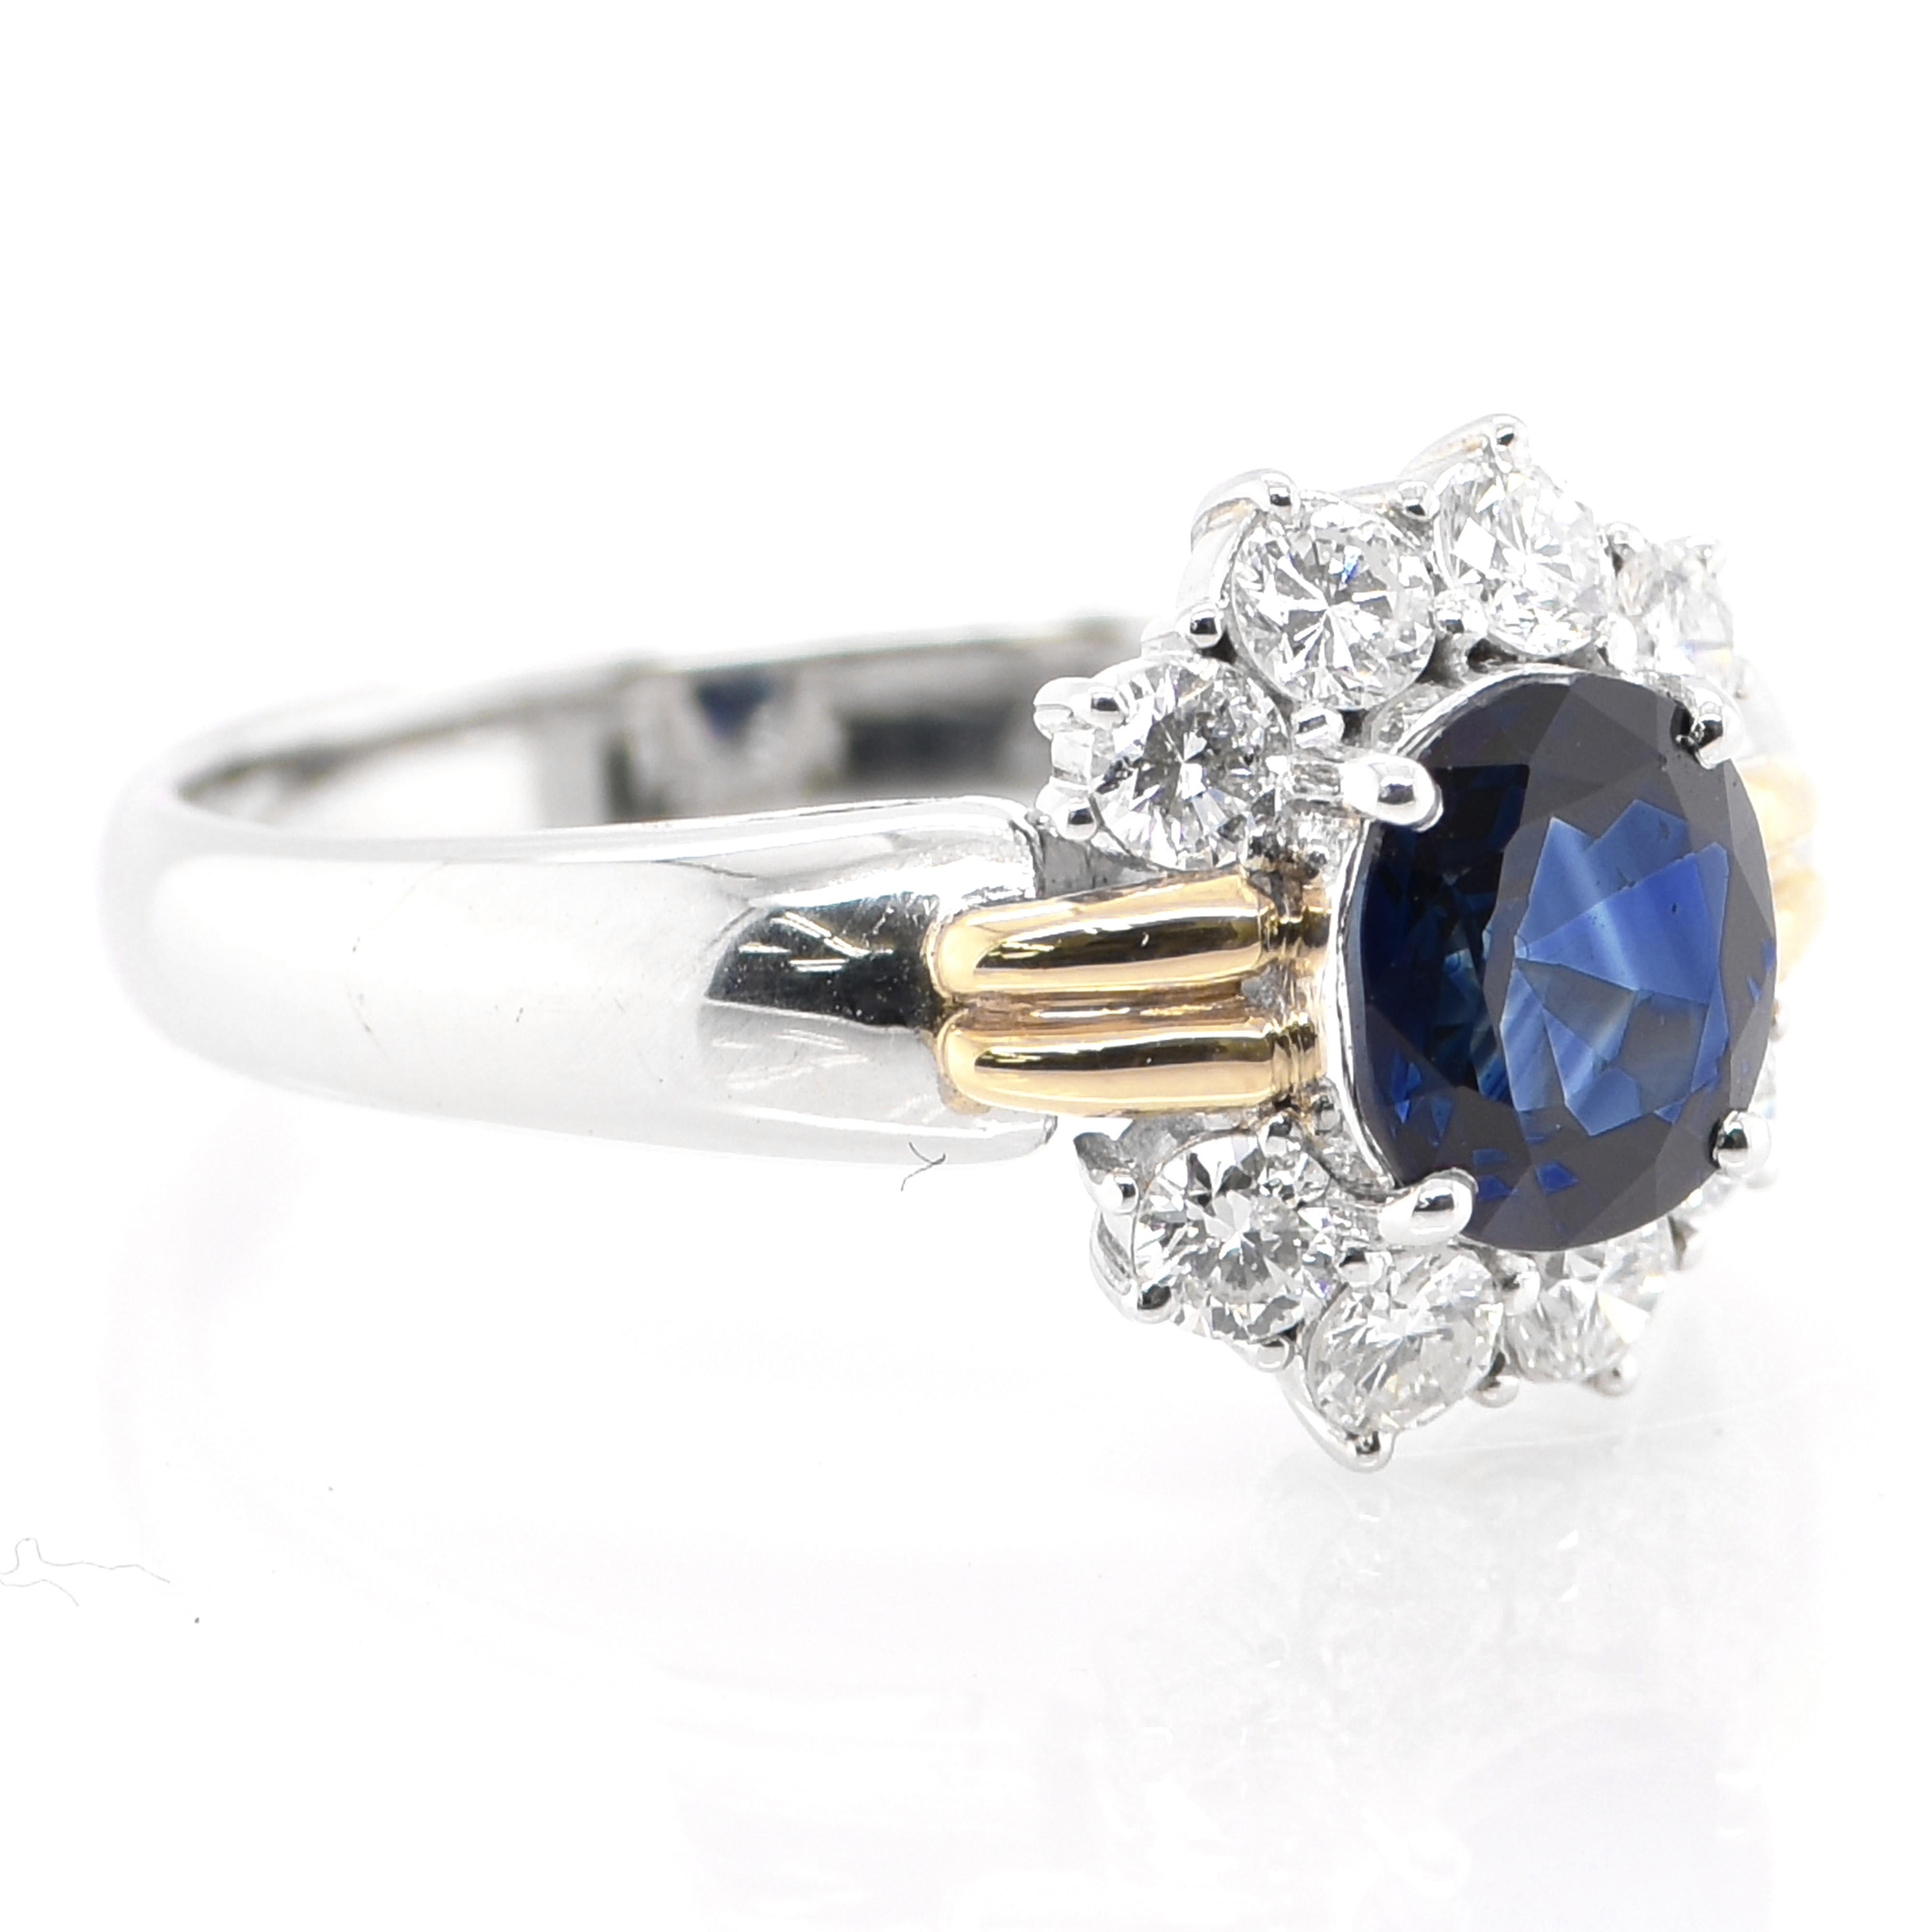 Modern 1.17 Carat Natural Sapphire and Diamond Ring set in Platinum and 18K Gold